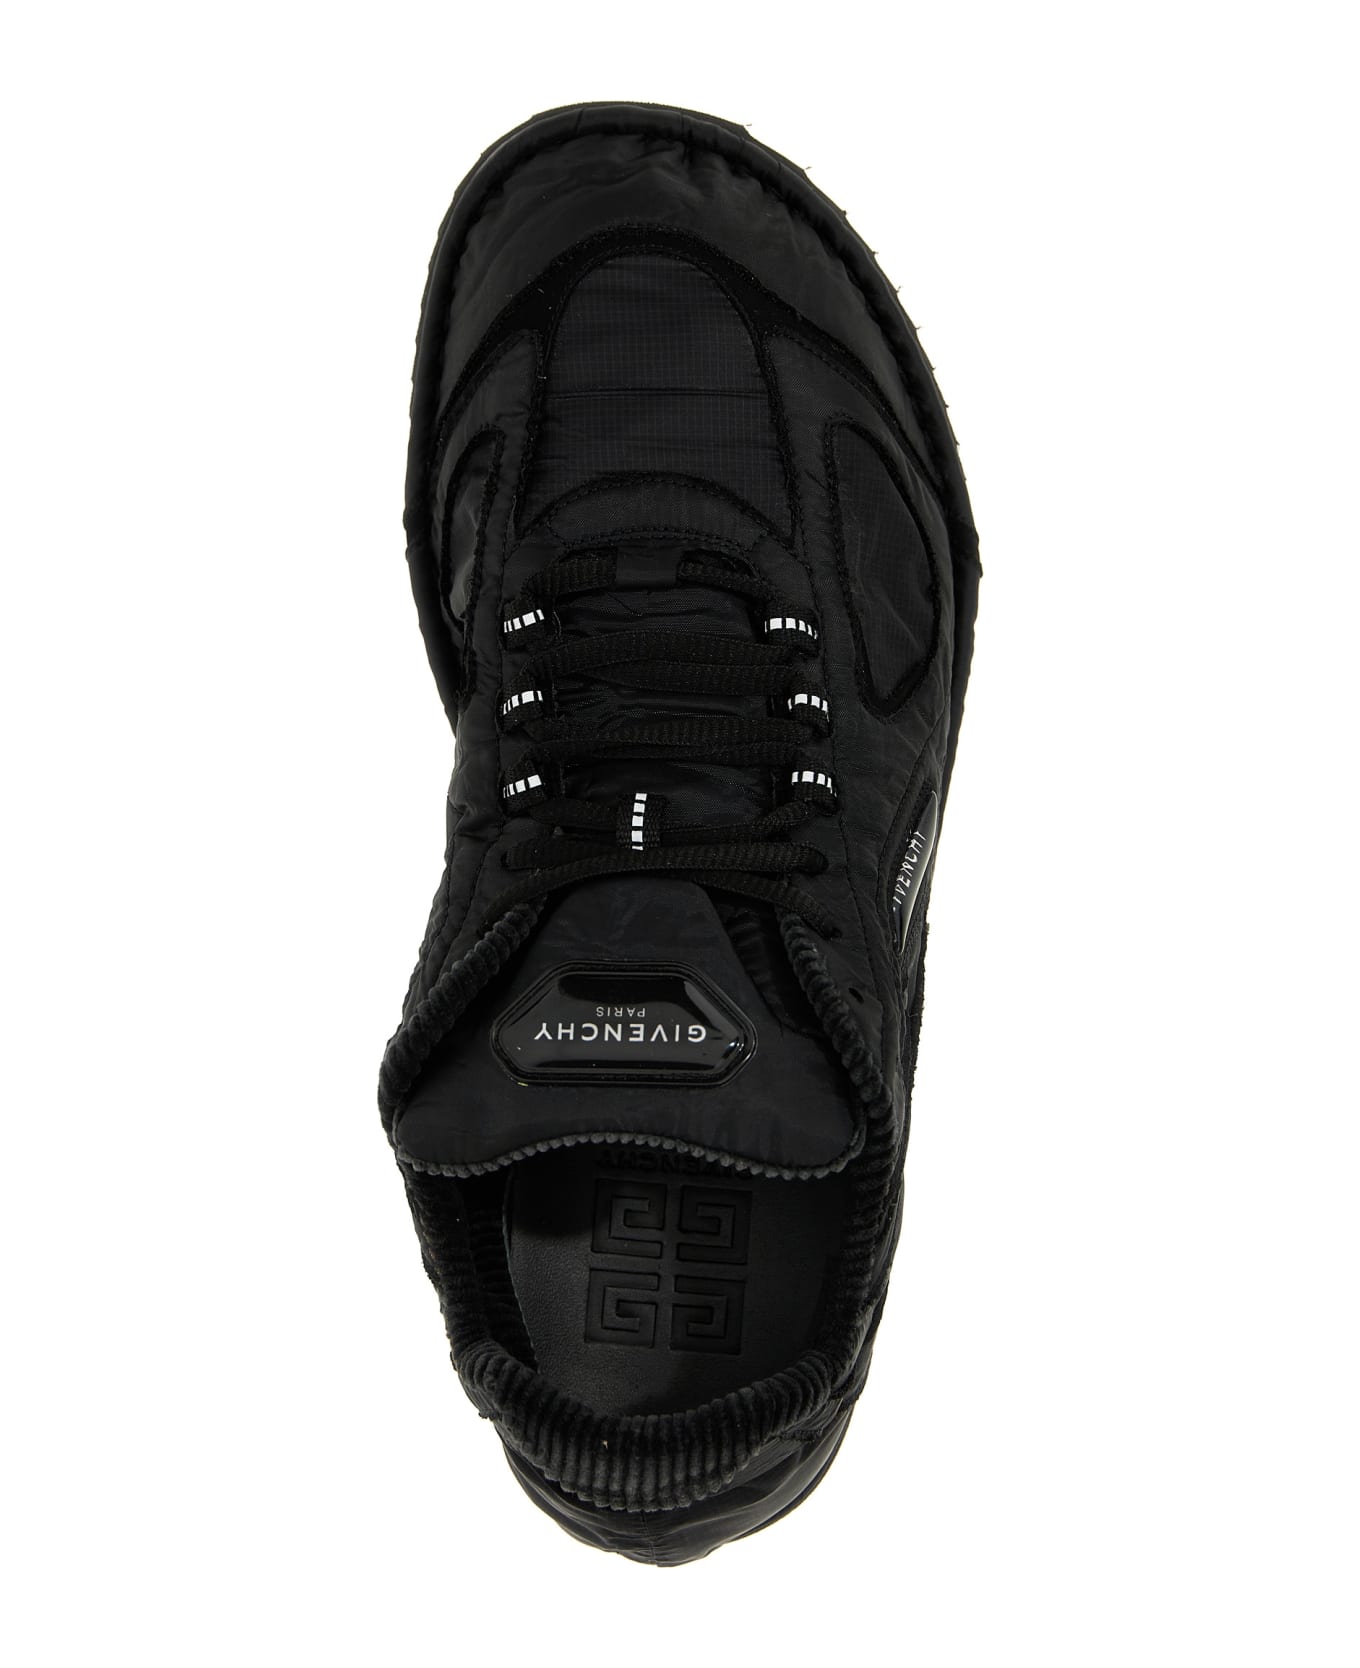 Givenchy 'flat' Sneakers - Black   スニーカー